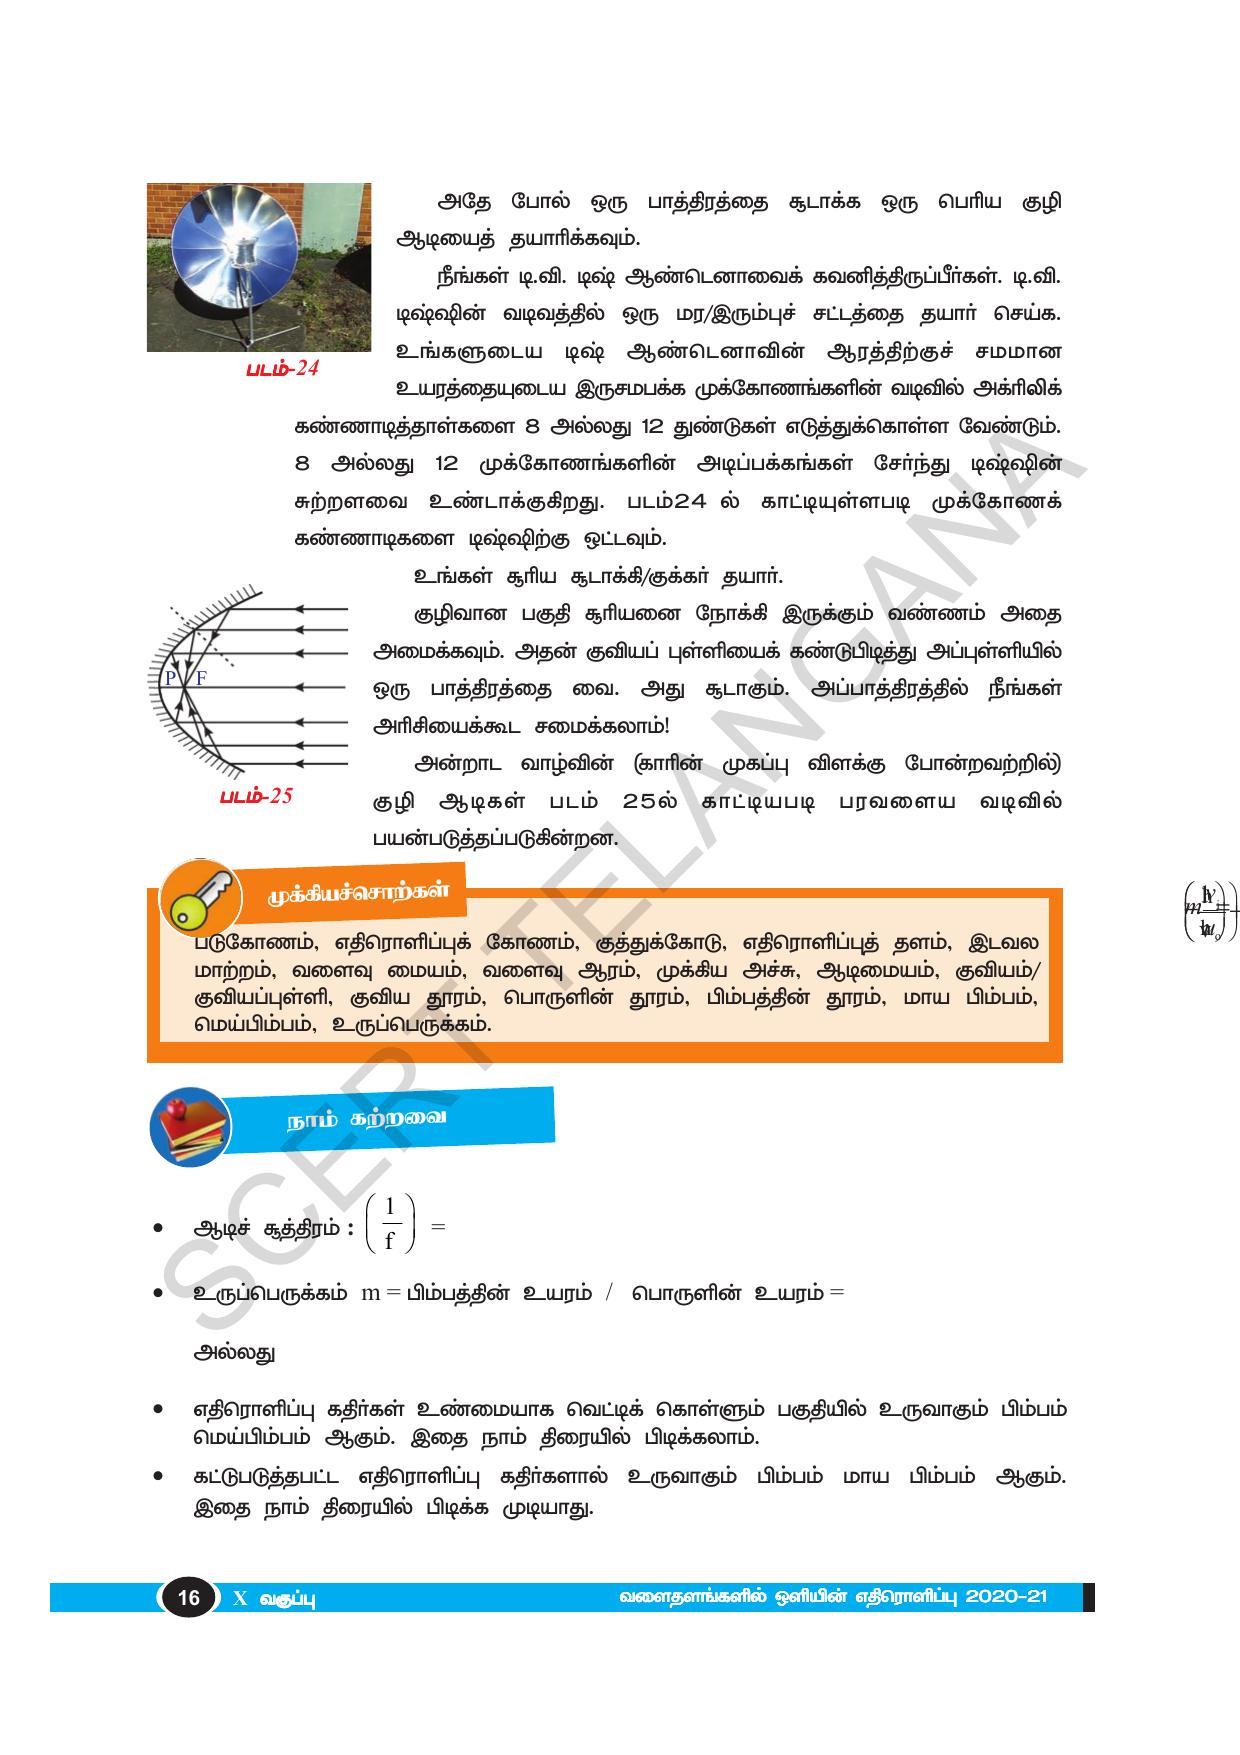 TS SCERT Class 10 Physical Science(Tamil Medium) Text Book - Page 28